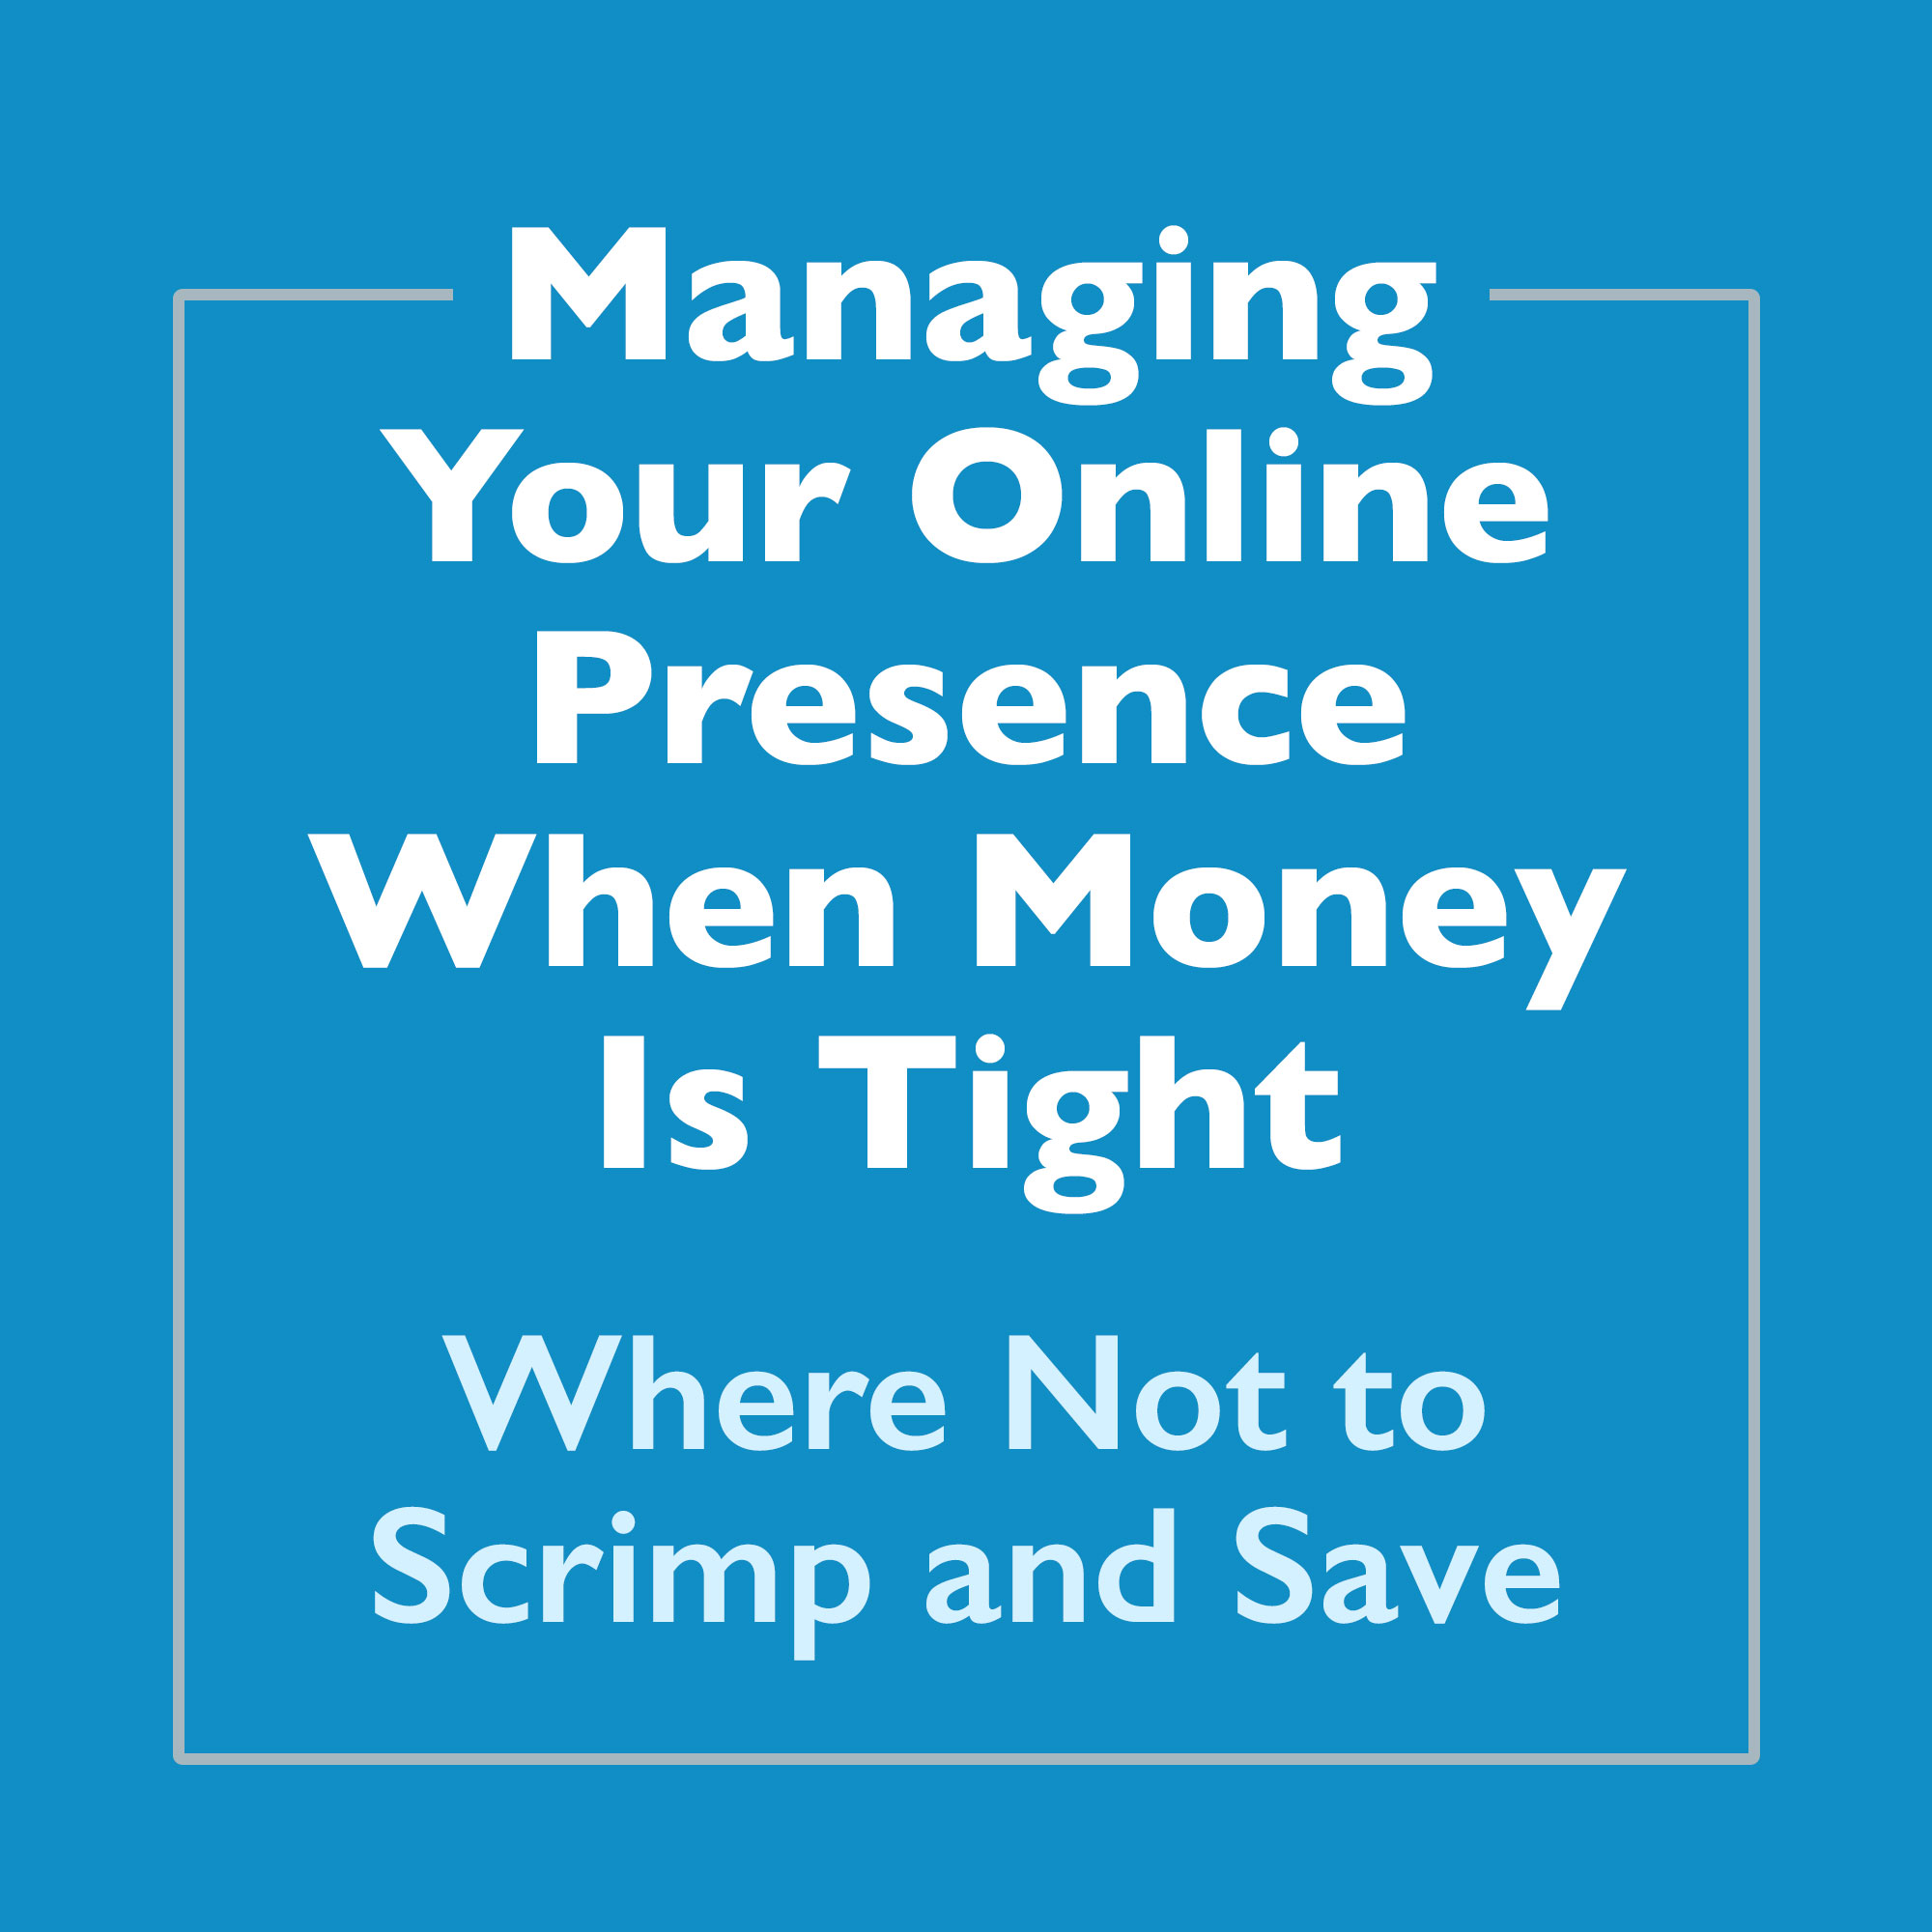 Article title text- Managing your online presence when money is tight: Where not to scrimp and save